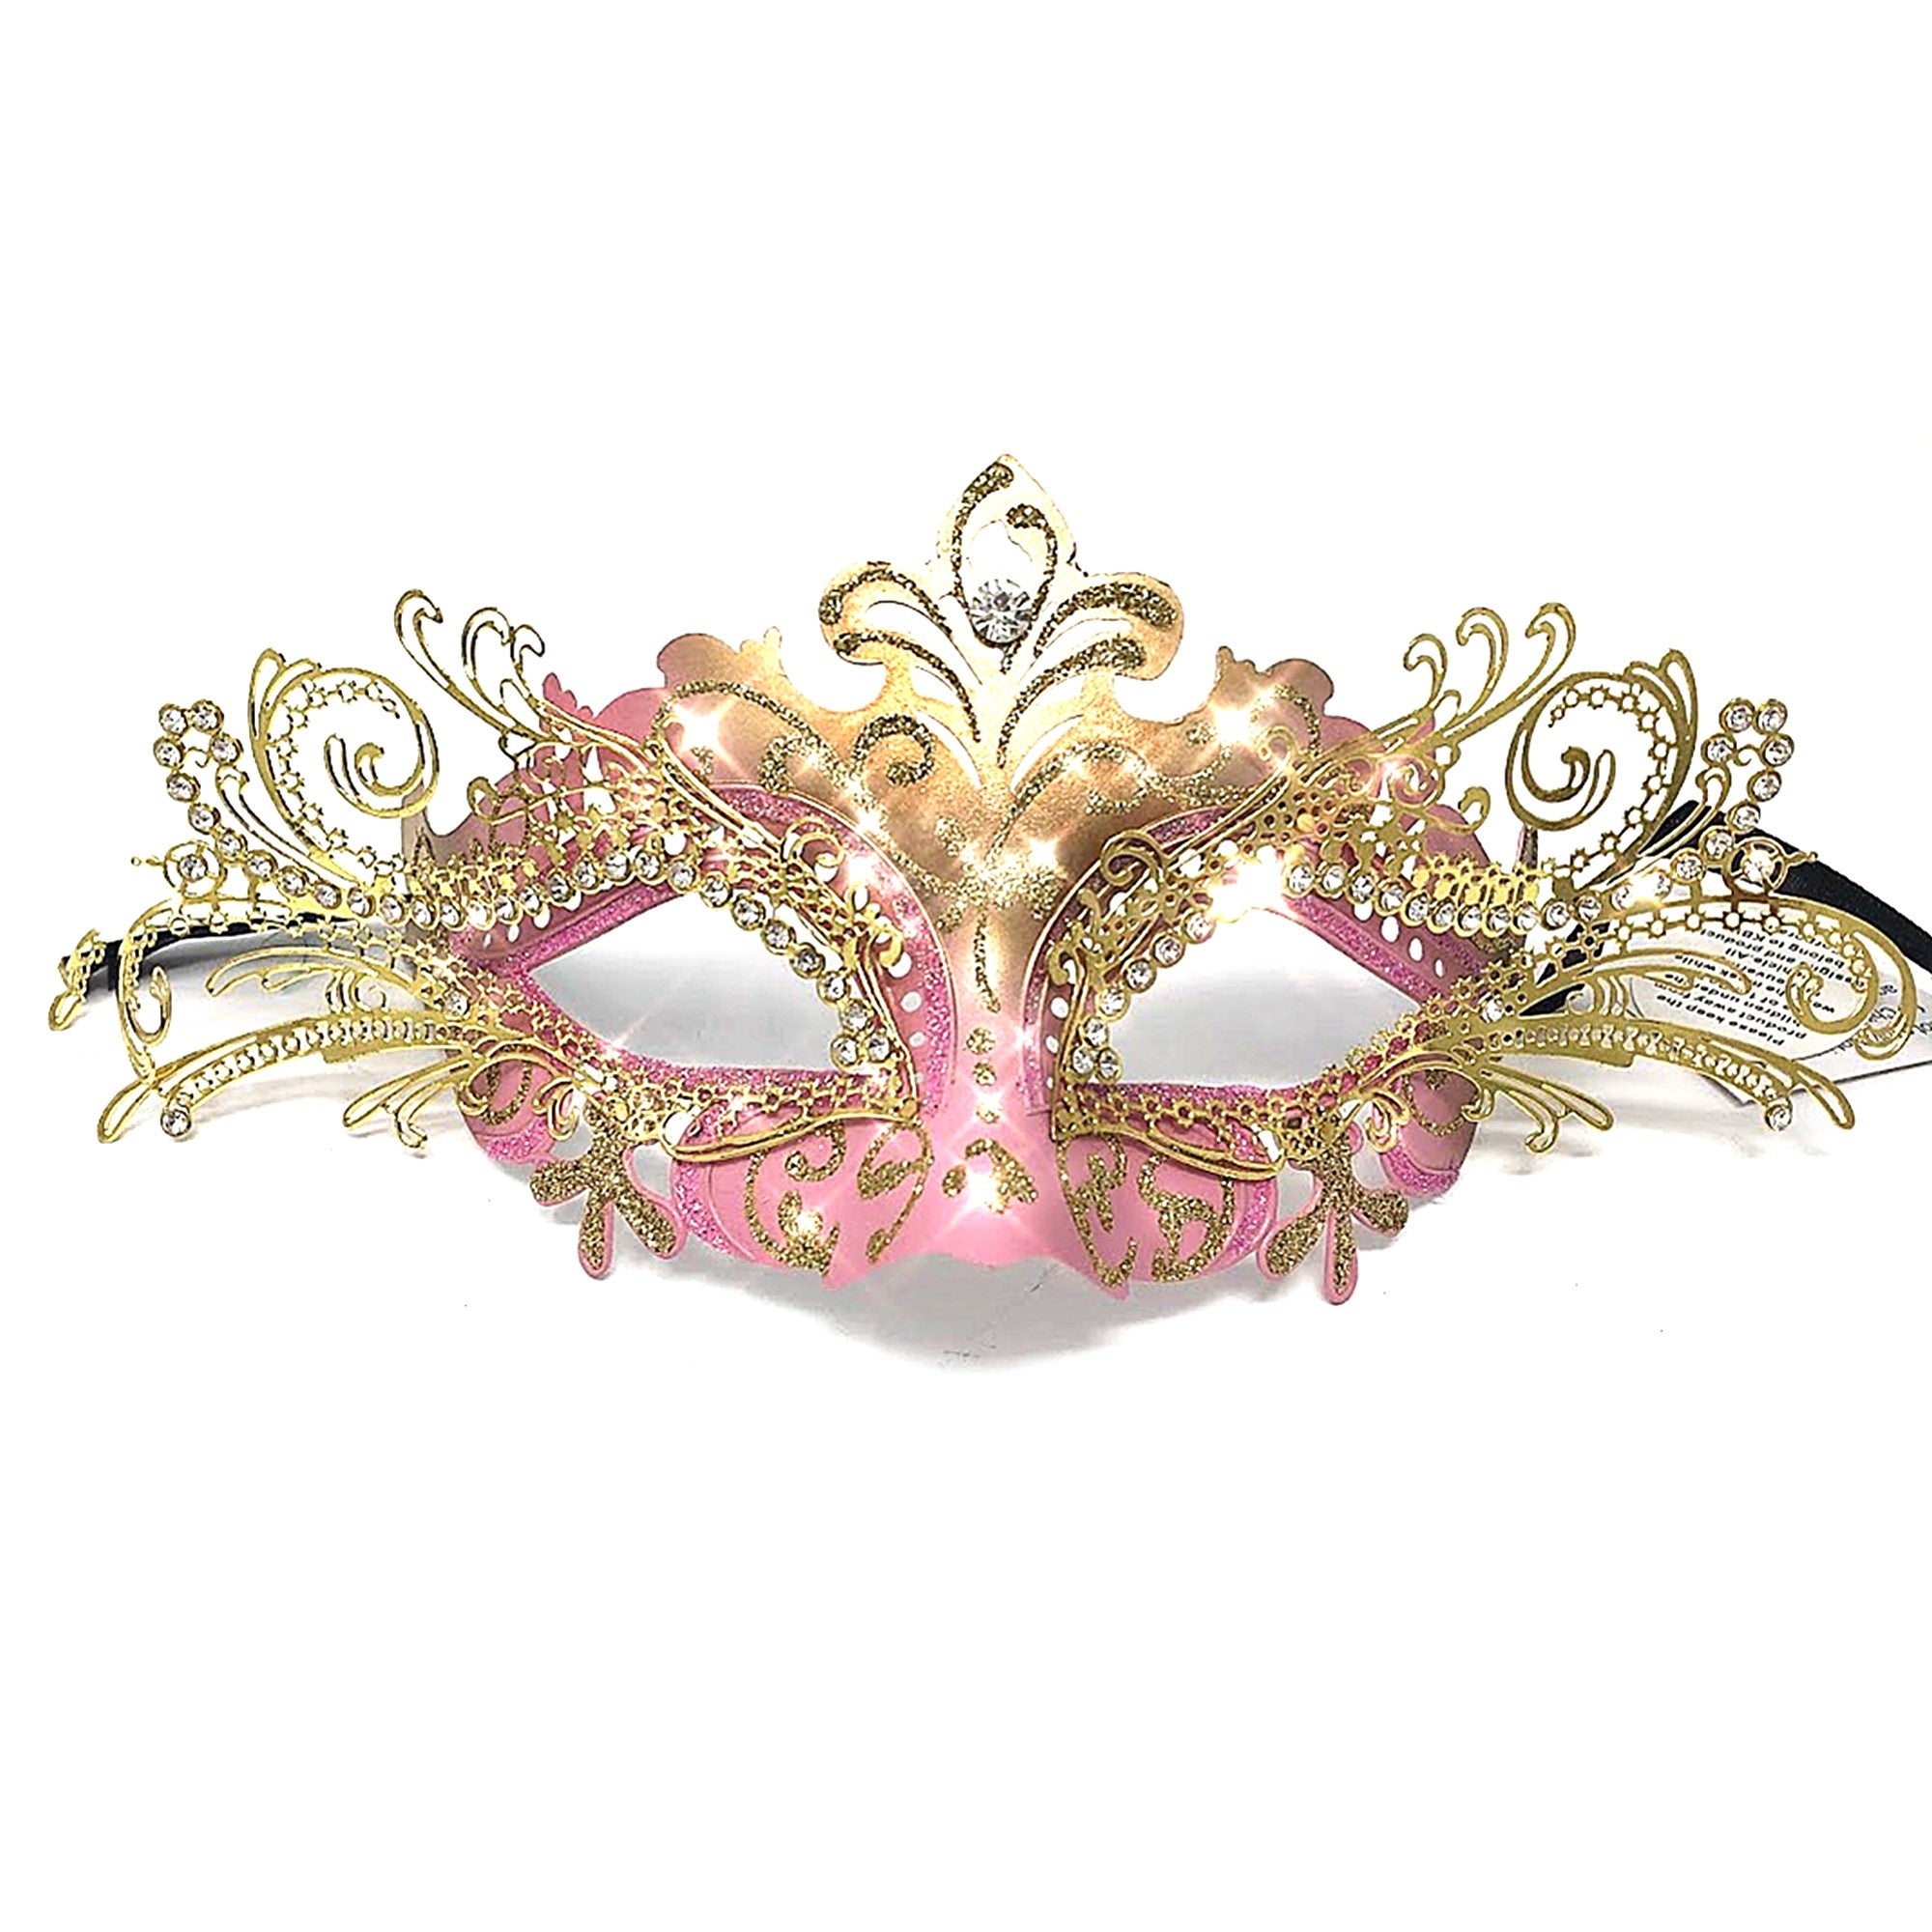 White Full Face Dance Masks Wedding Party Masks Hip Hop Woman Costume Mardi  Gras Opera Prom Mask Venetian Masquerade Party Gift From Calytao, $48.25